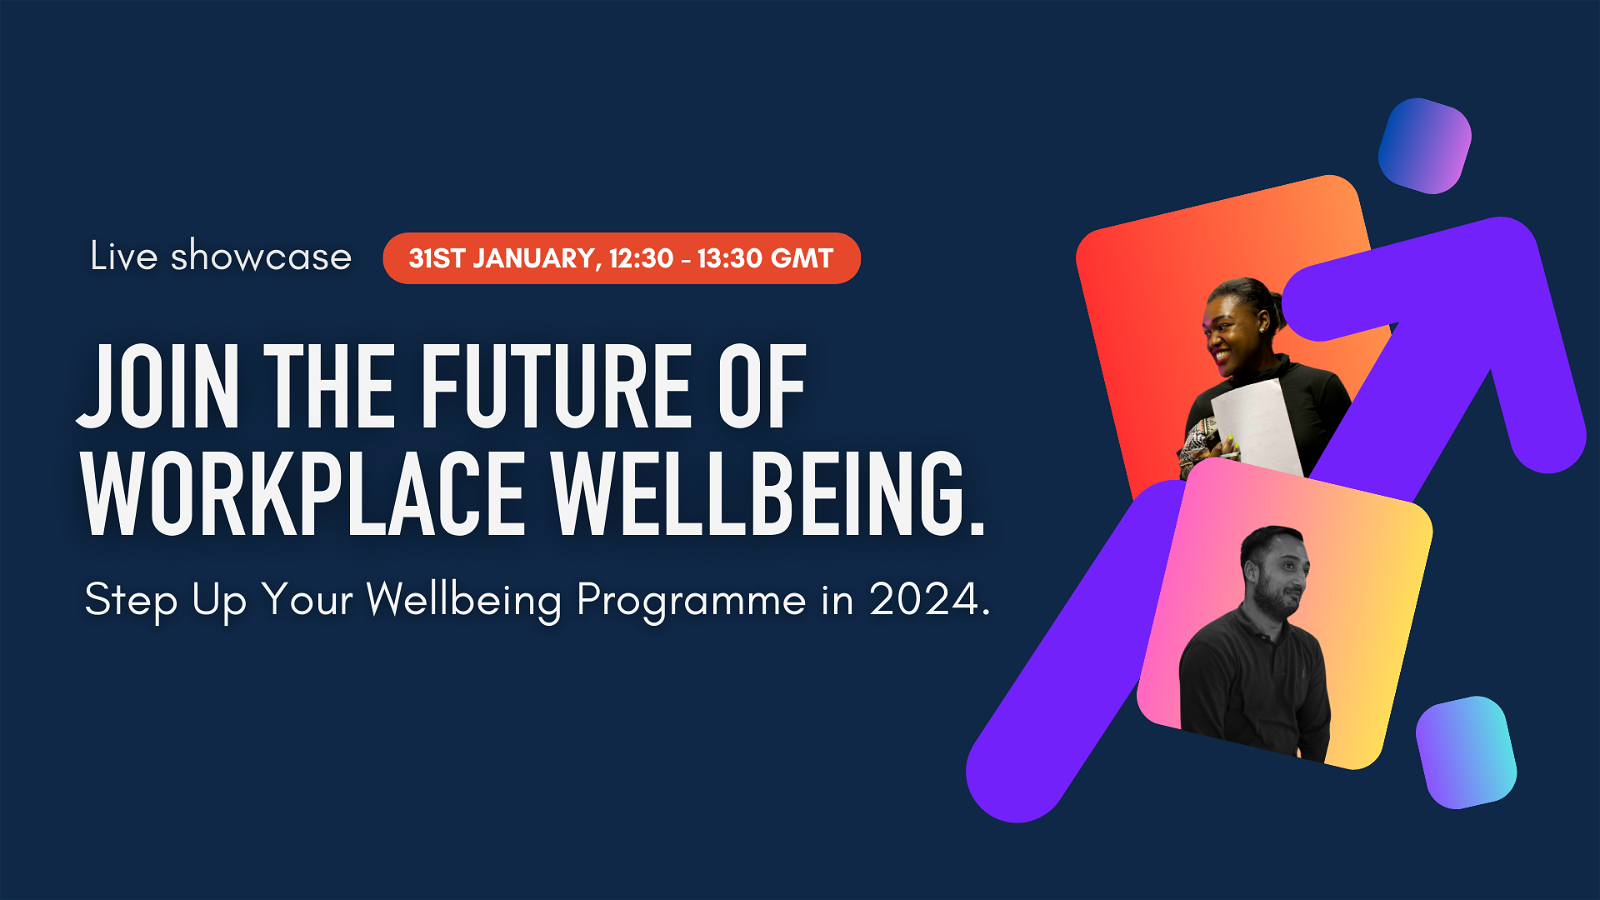 Step Up Your Wellbeing Programme in 2024